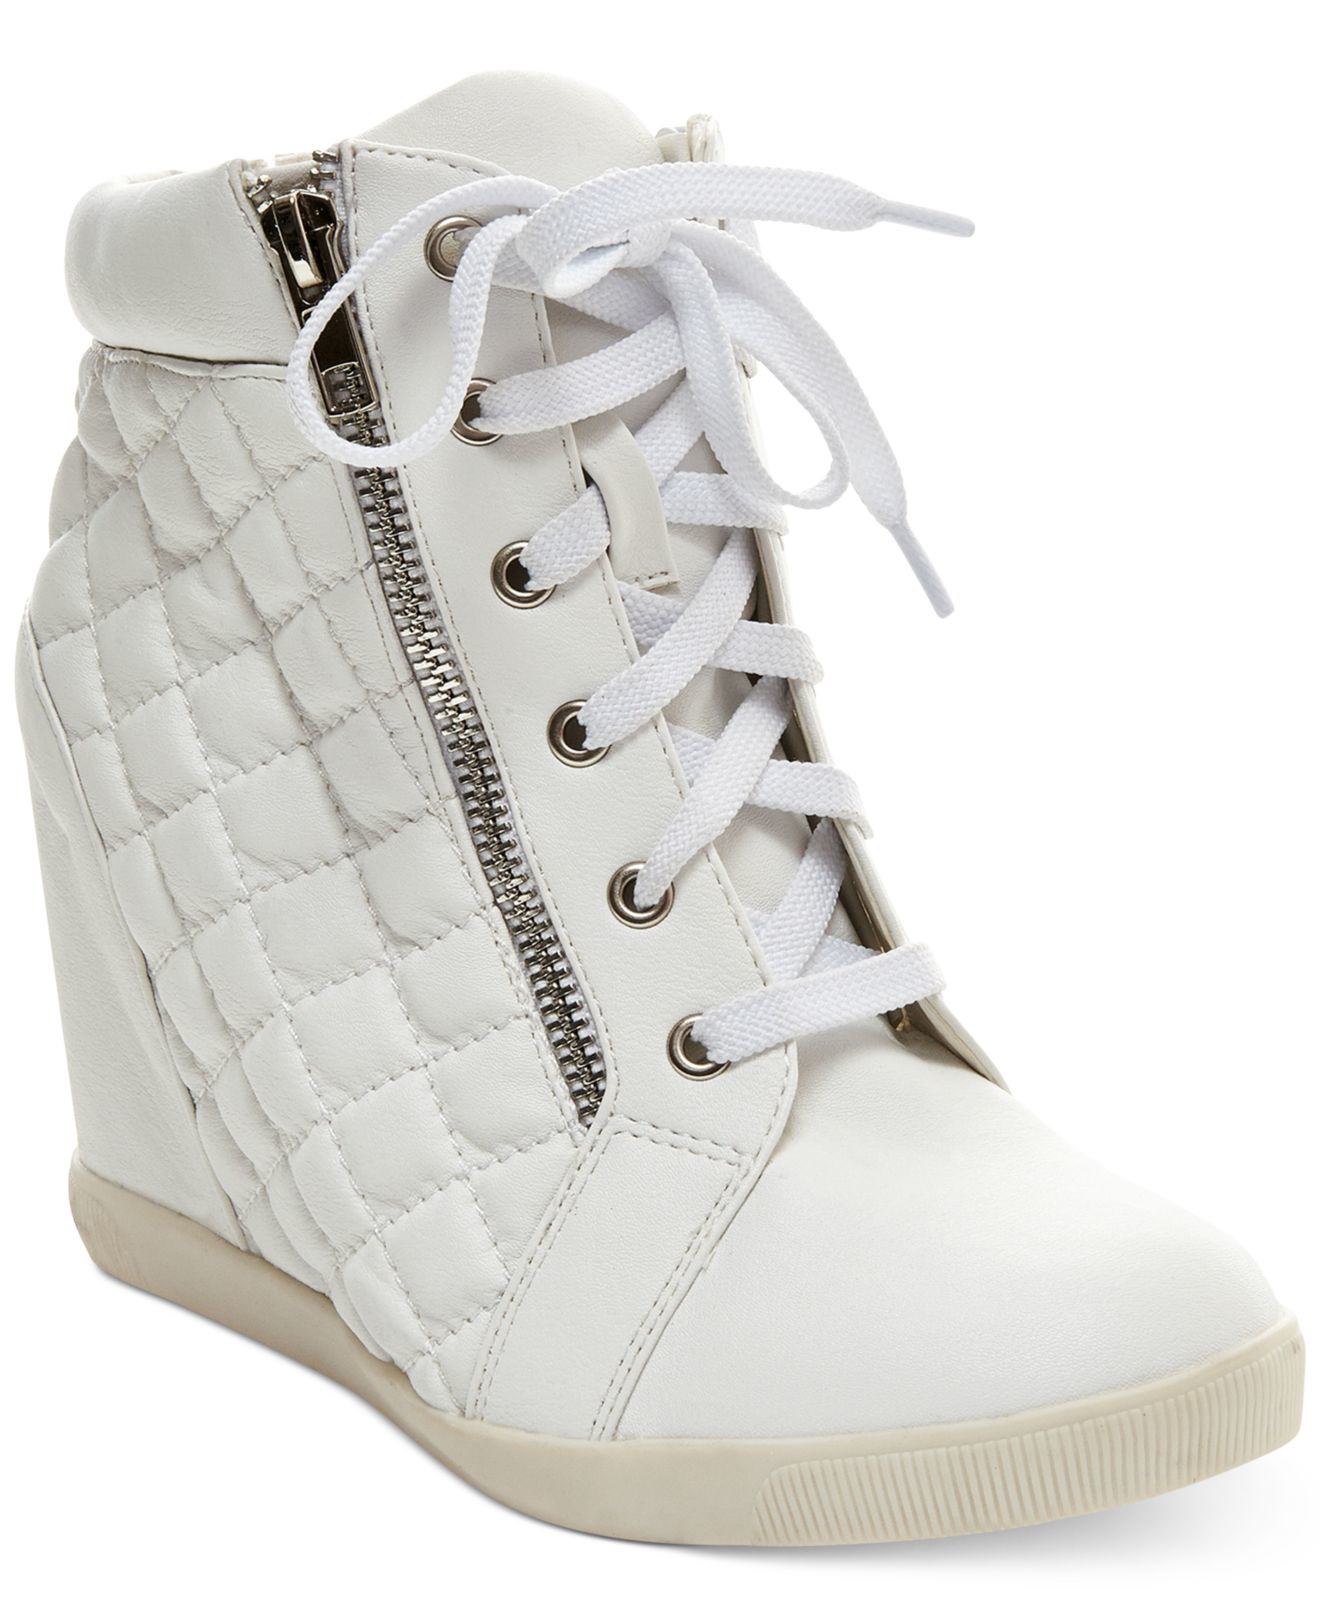 Baaxter Quilted High Top Wedge Sneakers 